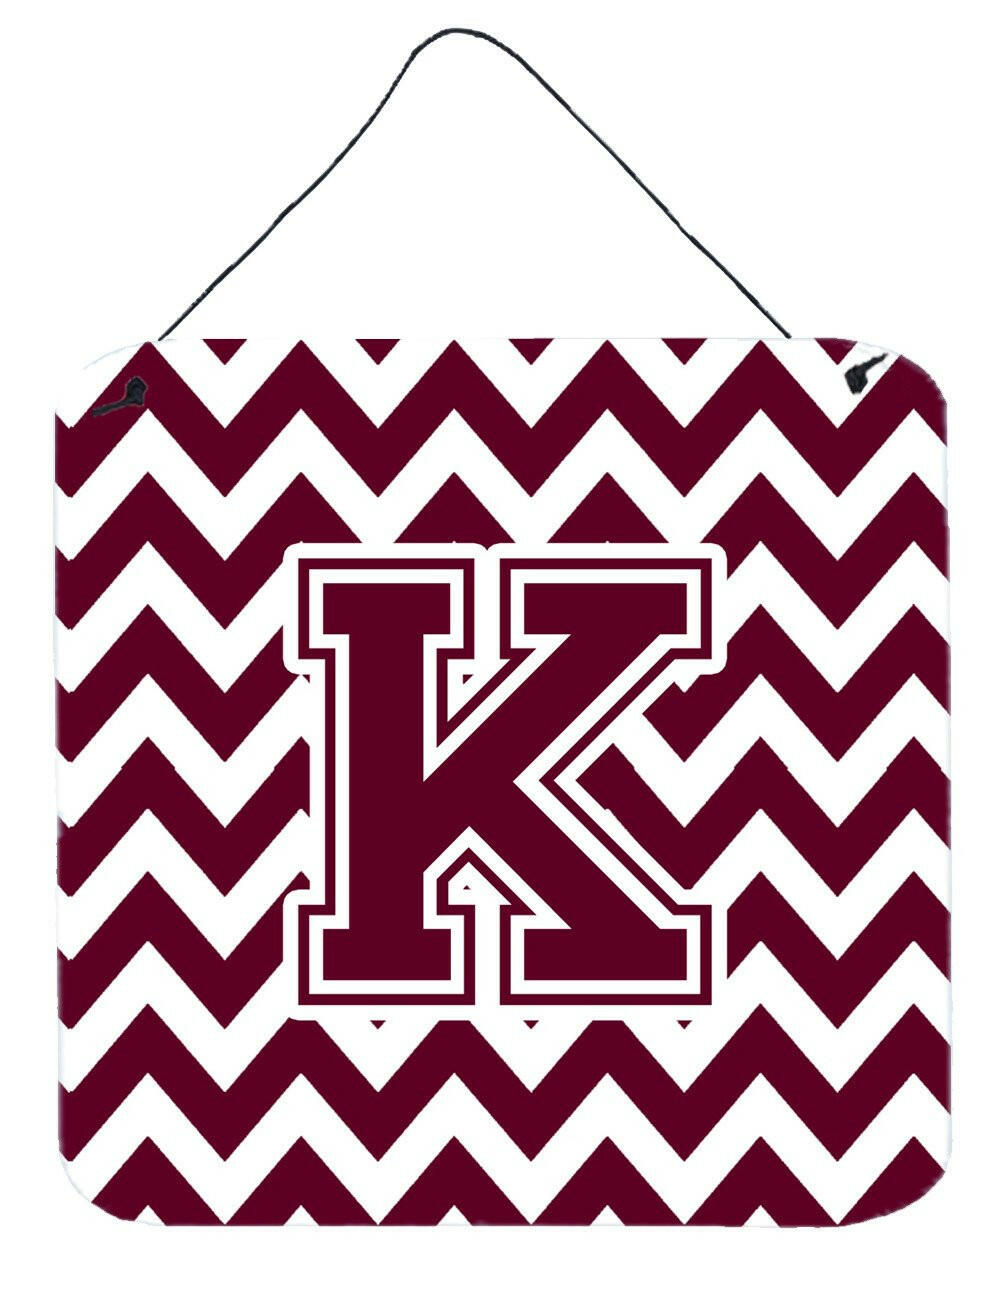 Letter K Chevron Maroon and White  Wall or Door Hanging Prints CJ1051-KDS66 by Caroline's Treasures